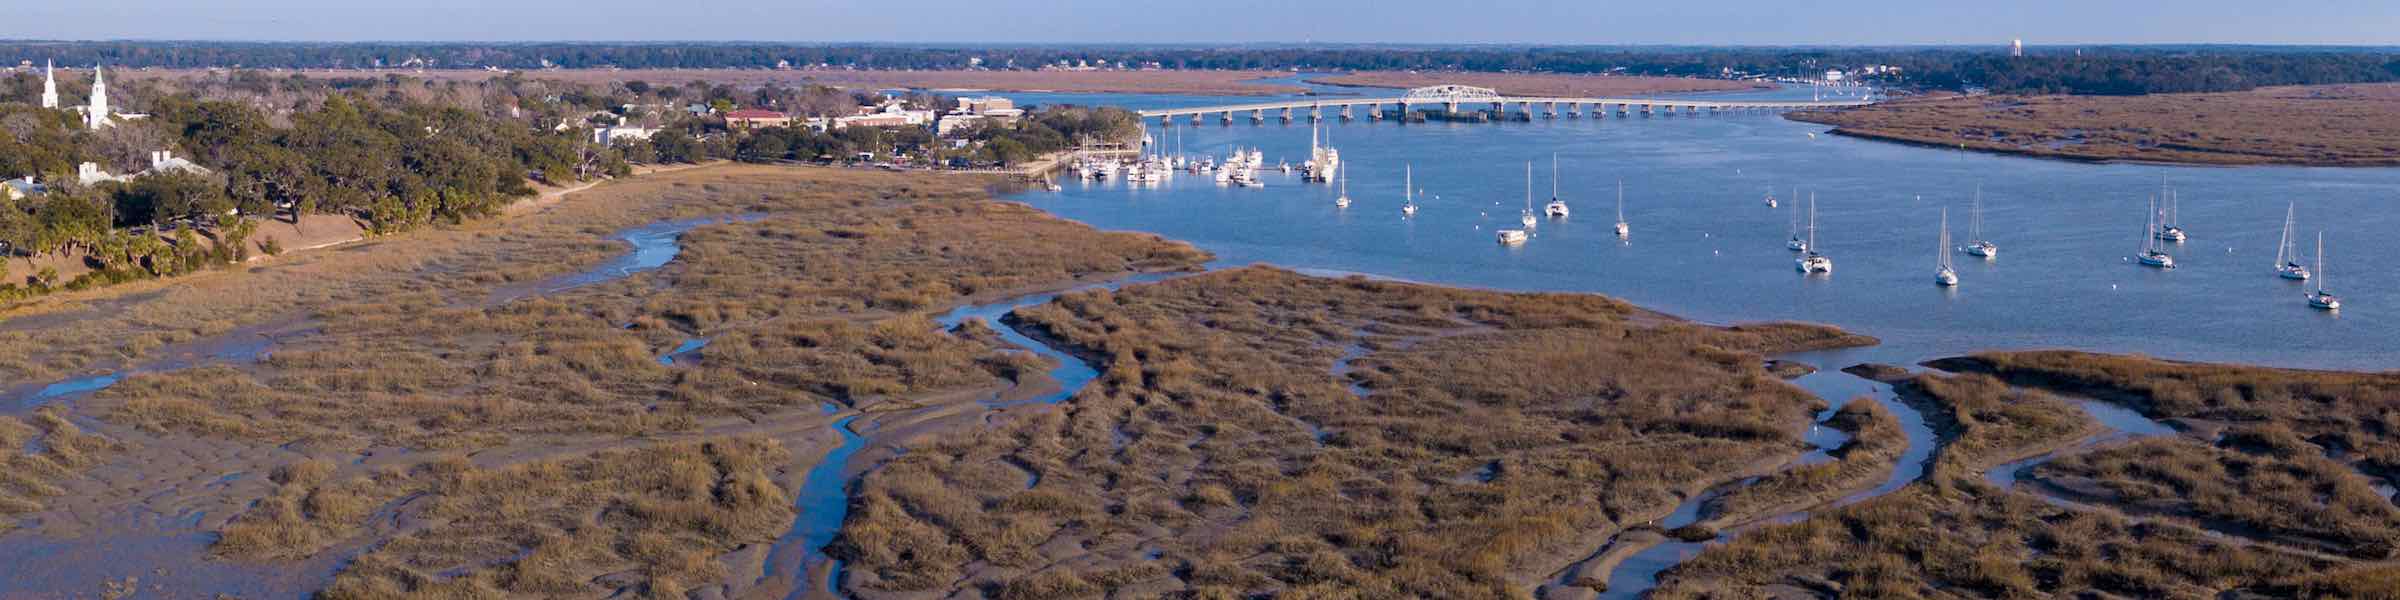 View of the marshes and river at Beaufort, SC.